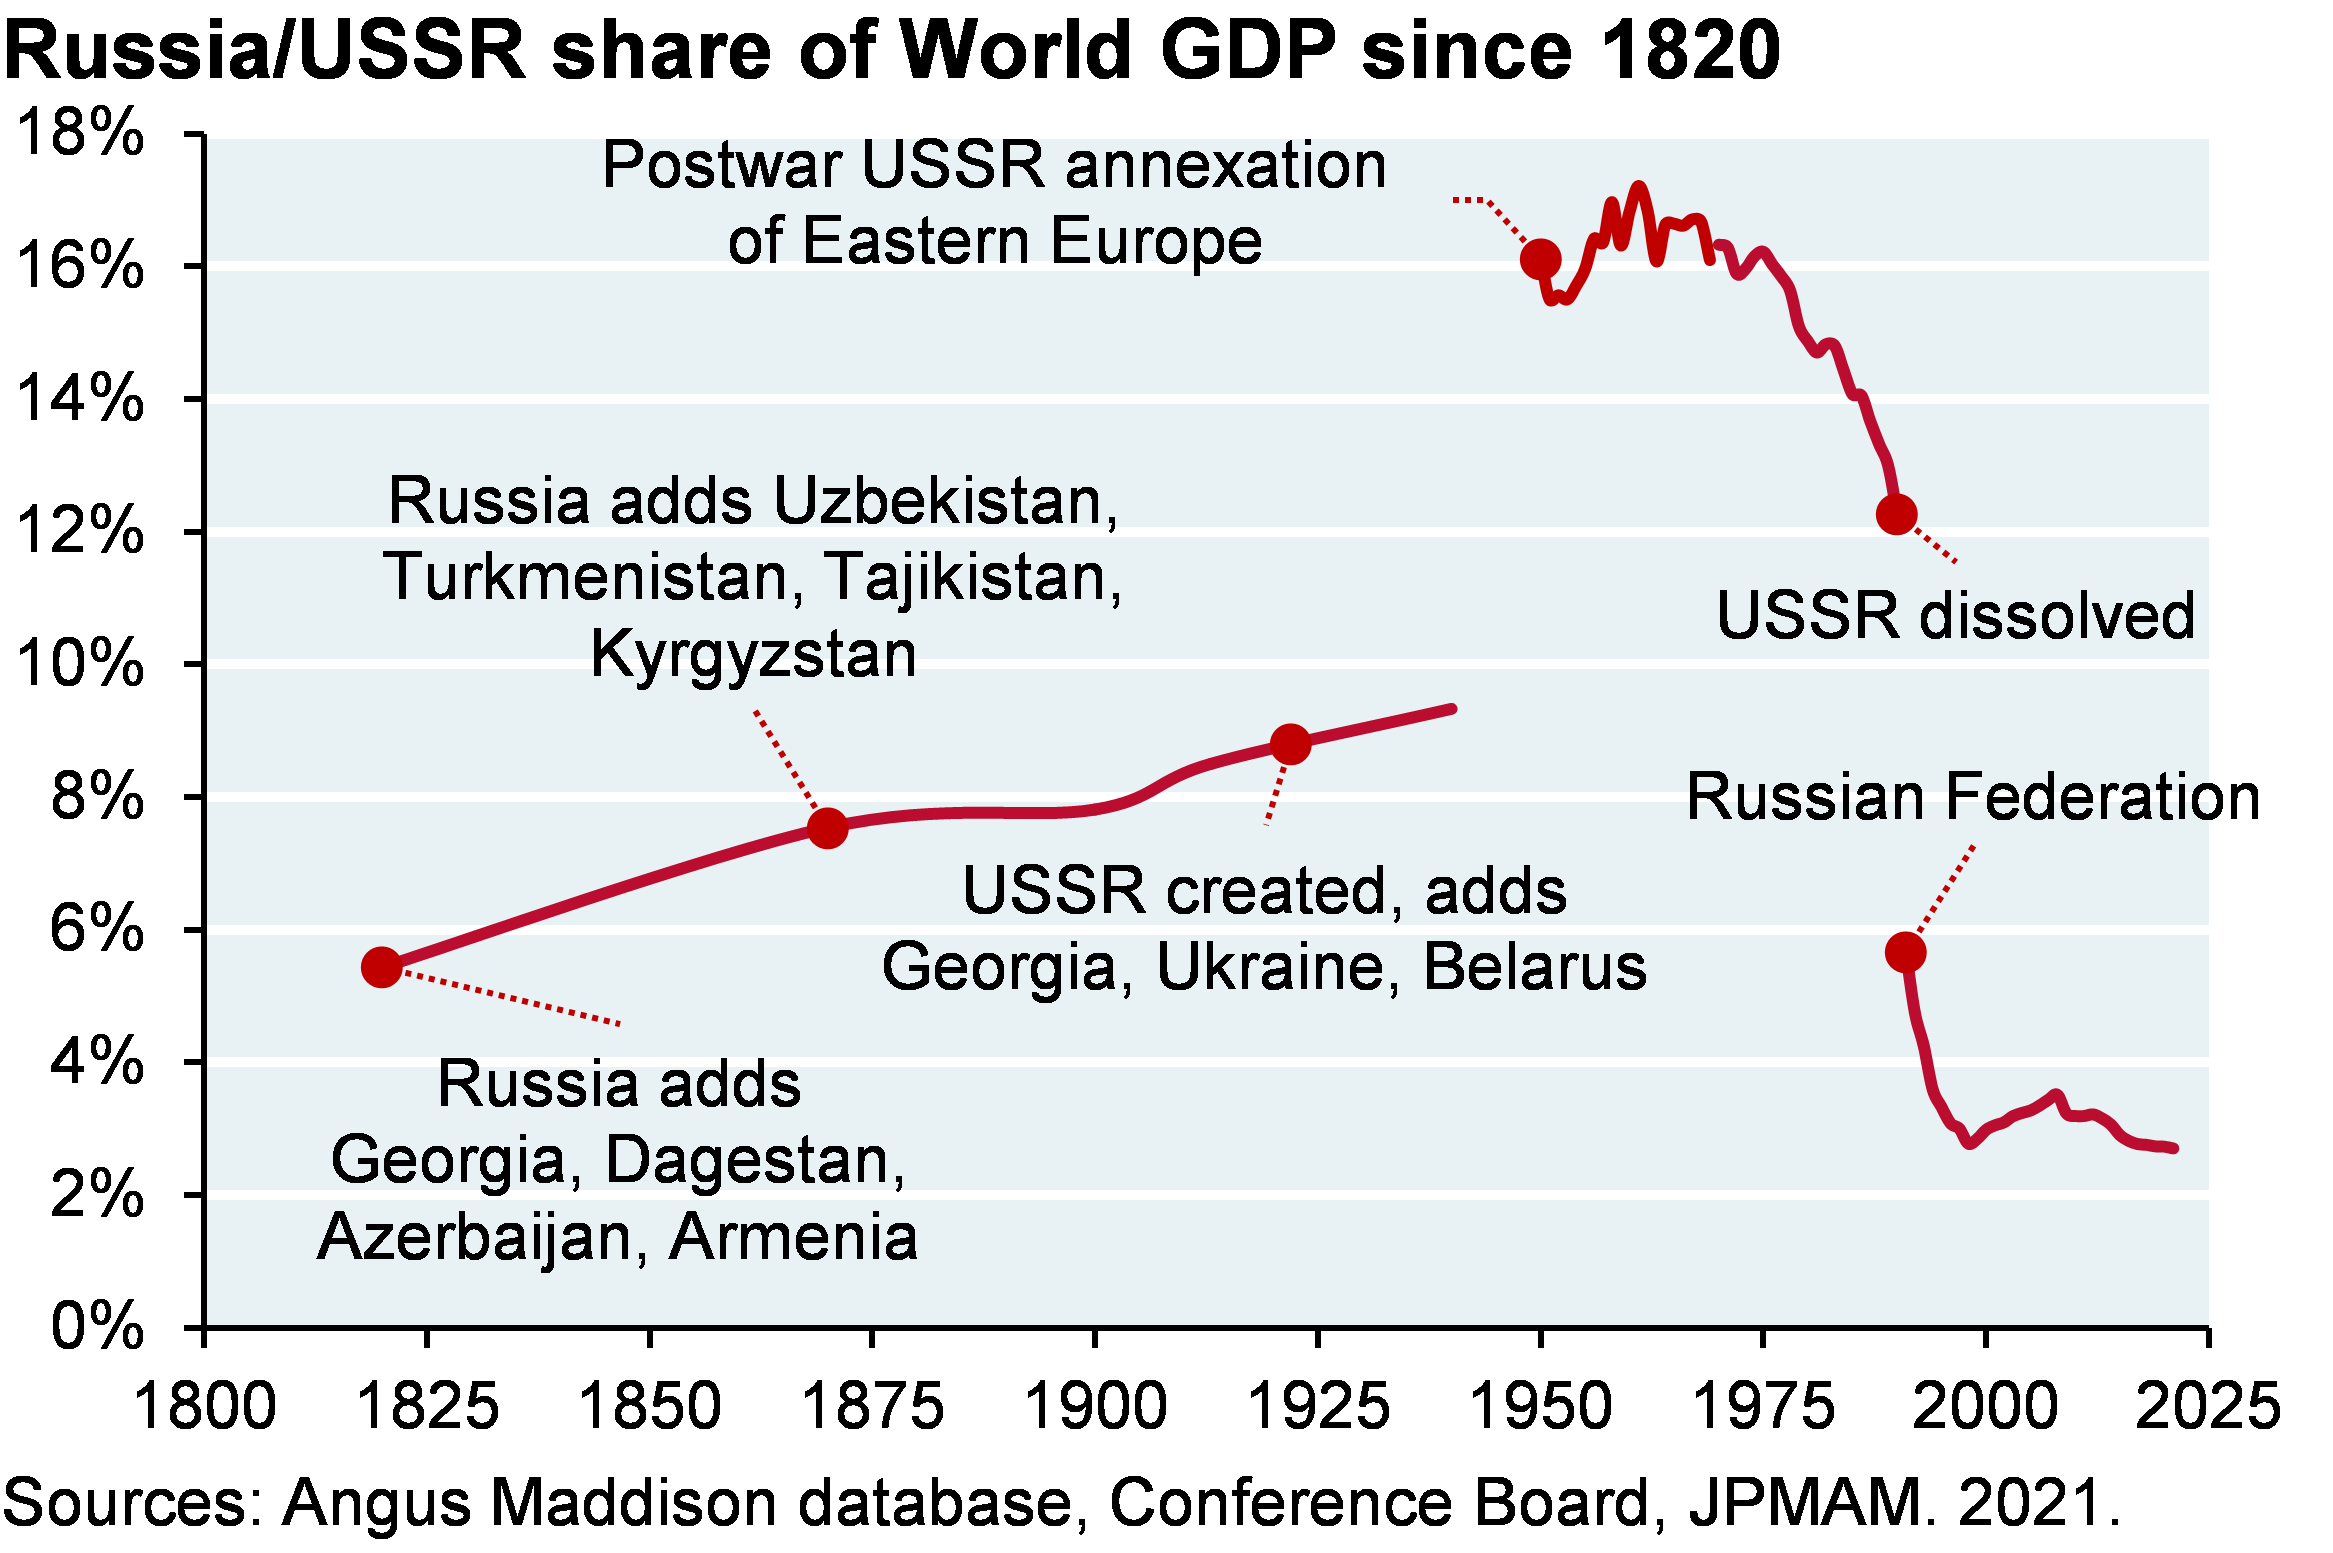 Line chart which shows Russia/USSR share of World GDP since 1820. The chart shows that Russia’s current GDP represents a significantly smaller portion of global GDP than peak USSR shares in the 1950s and even Russia’s share during the early 1990s. 